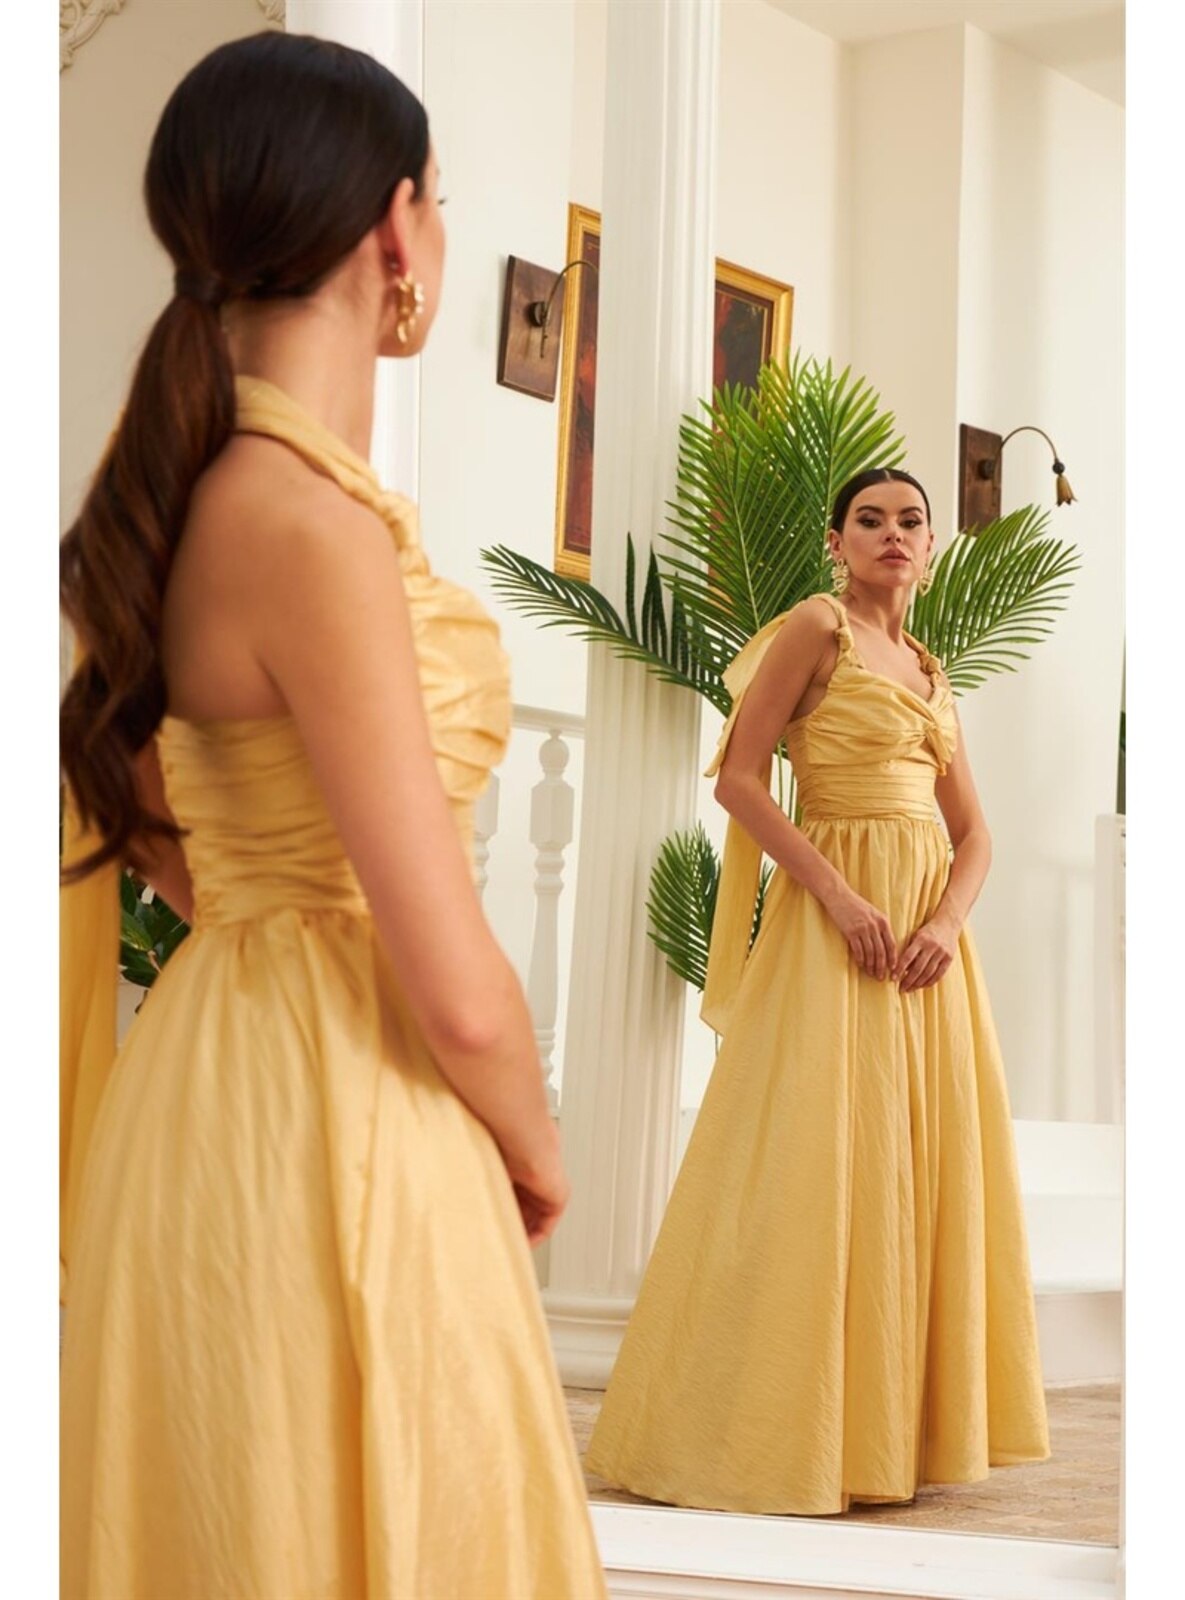 Glitter Gold Evening Dresses Long V-neck A-line Floor-length Simple Beads  Prom Dresses With Half Sleeves - AliExpress